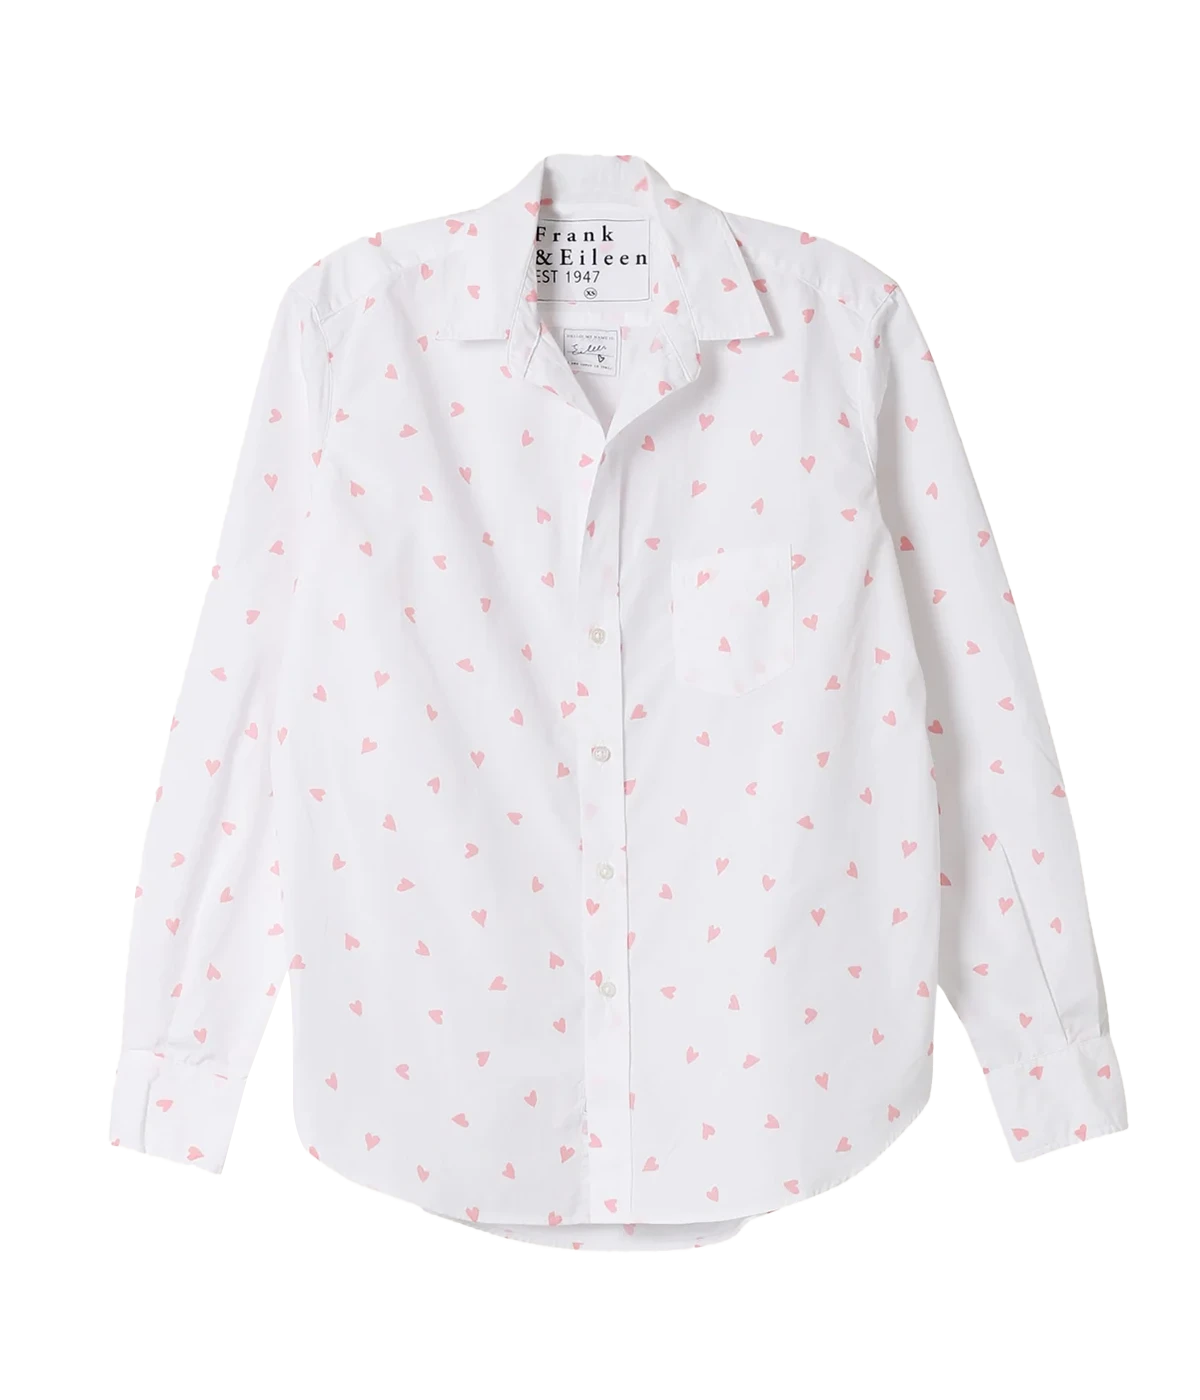 Frank and Eileen’s bestselling Eileens shirt crafted from 100% Italian Cotton. A white long sleeve button up shirt with scattered pink hearts, the hem of this bra-friendly wash and wear shirt is long enough to cover your bum. Adorned with a chest pocket and no back pleat, the bust-flattering button placement and soft, round shoulder looks great on every body!   